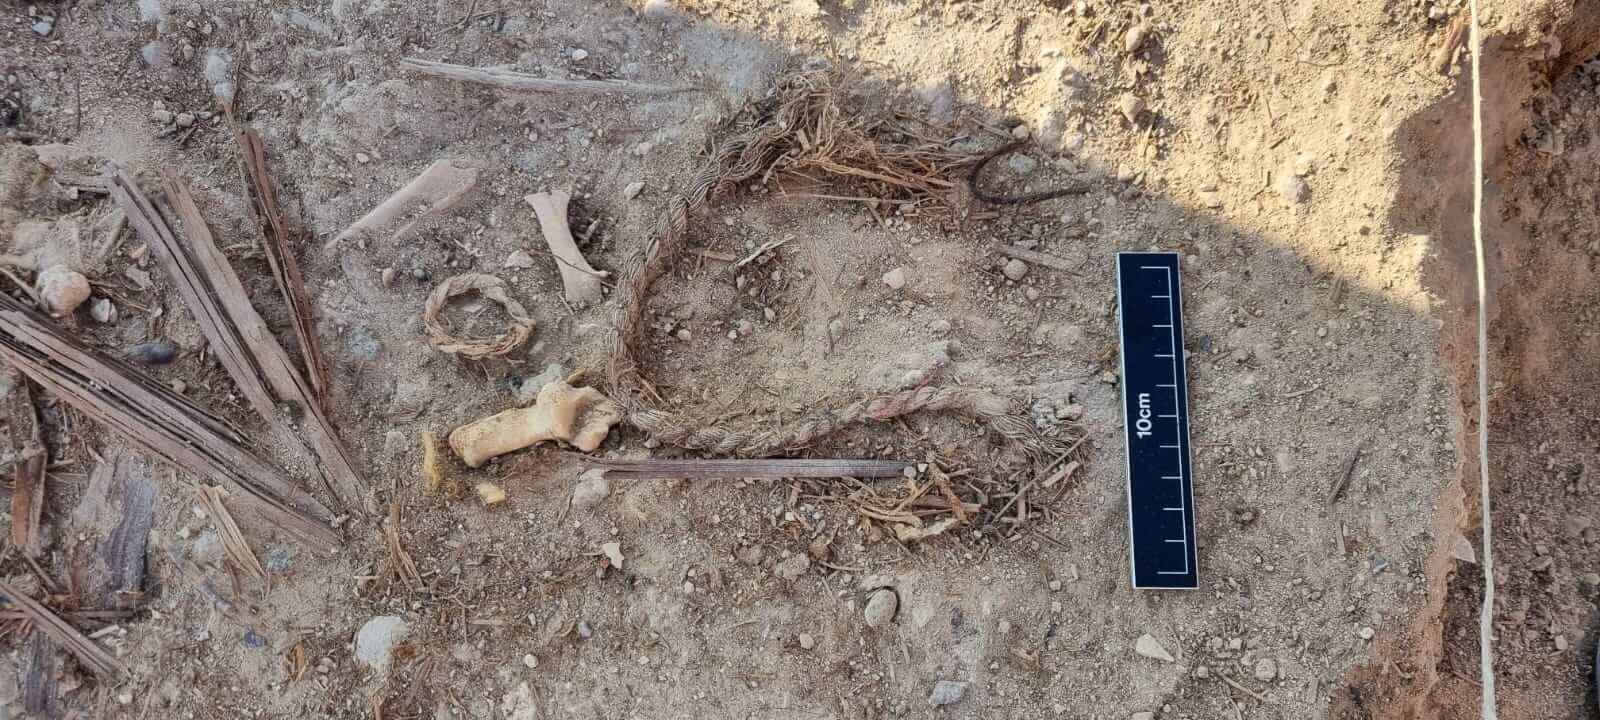 Findings in Nahal Omer in the Arava indicating extensive international trade in the seventh and eighth centuries AD. Photo: excavation team